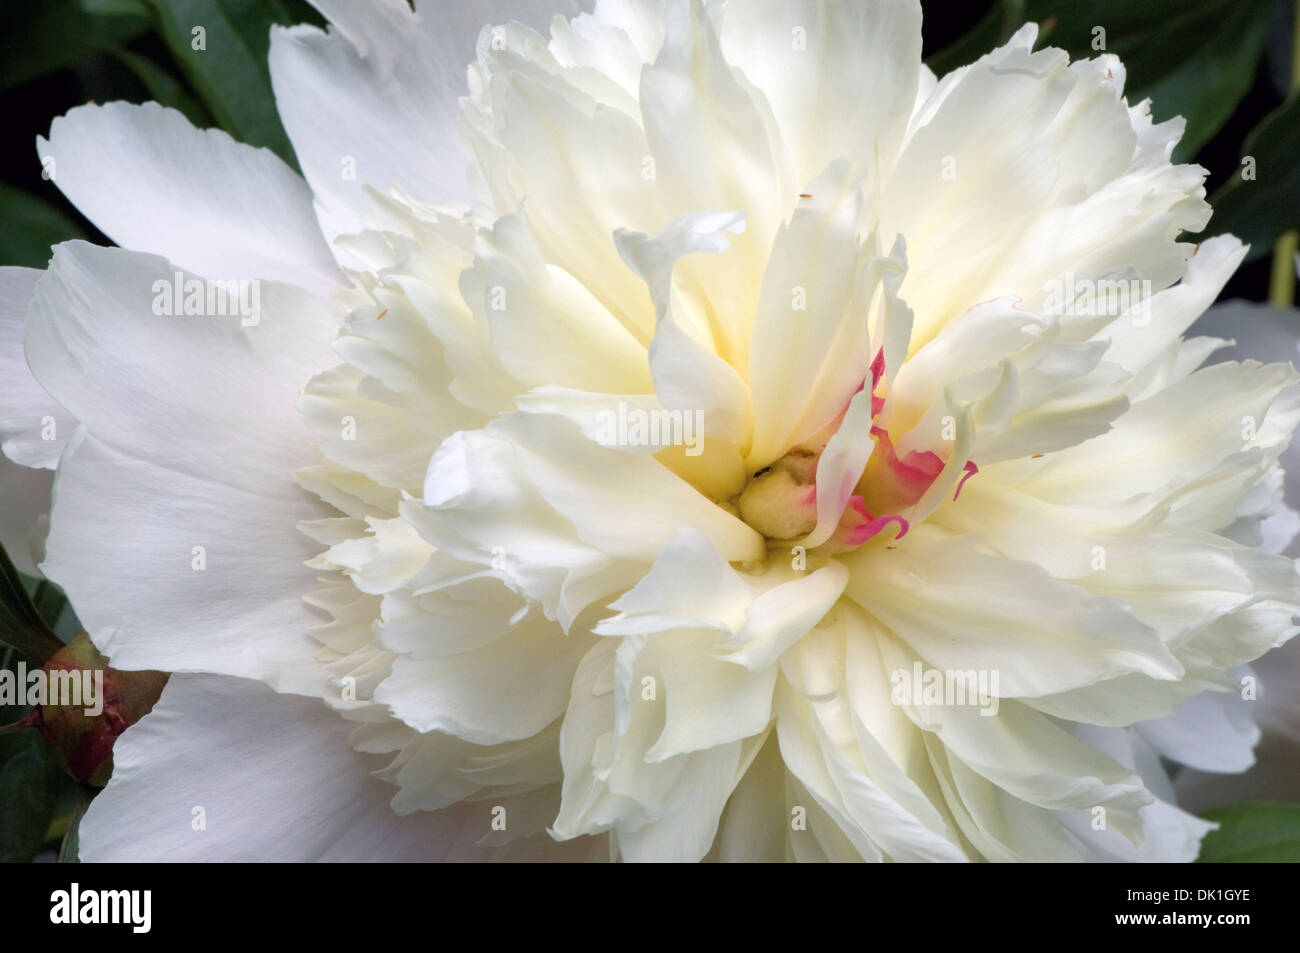 White peony flower with red-pink stripe in the center, macro close up. Stock Photo